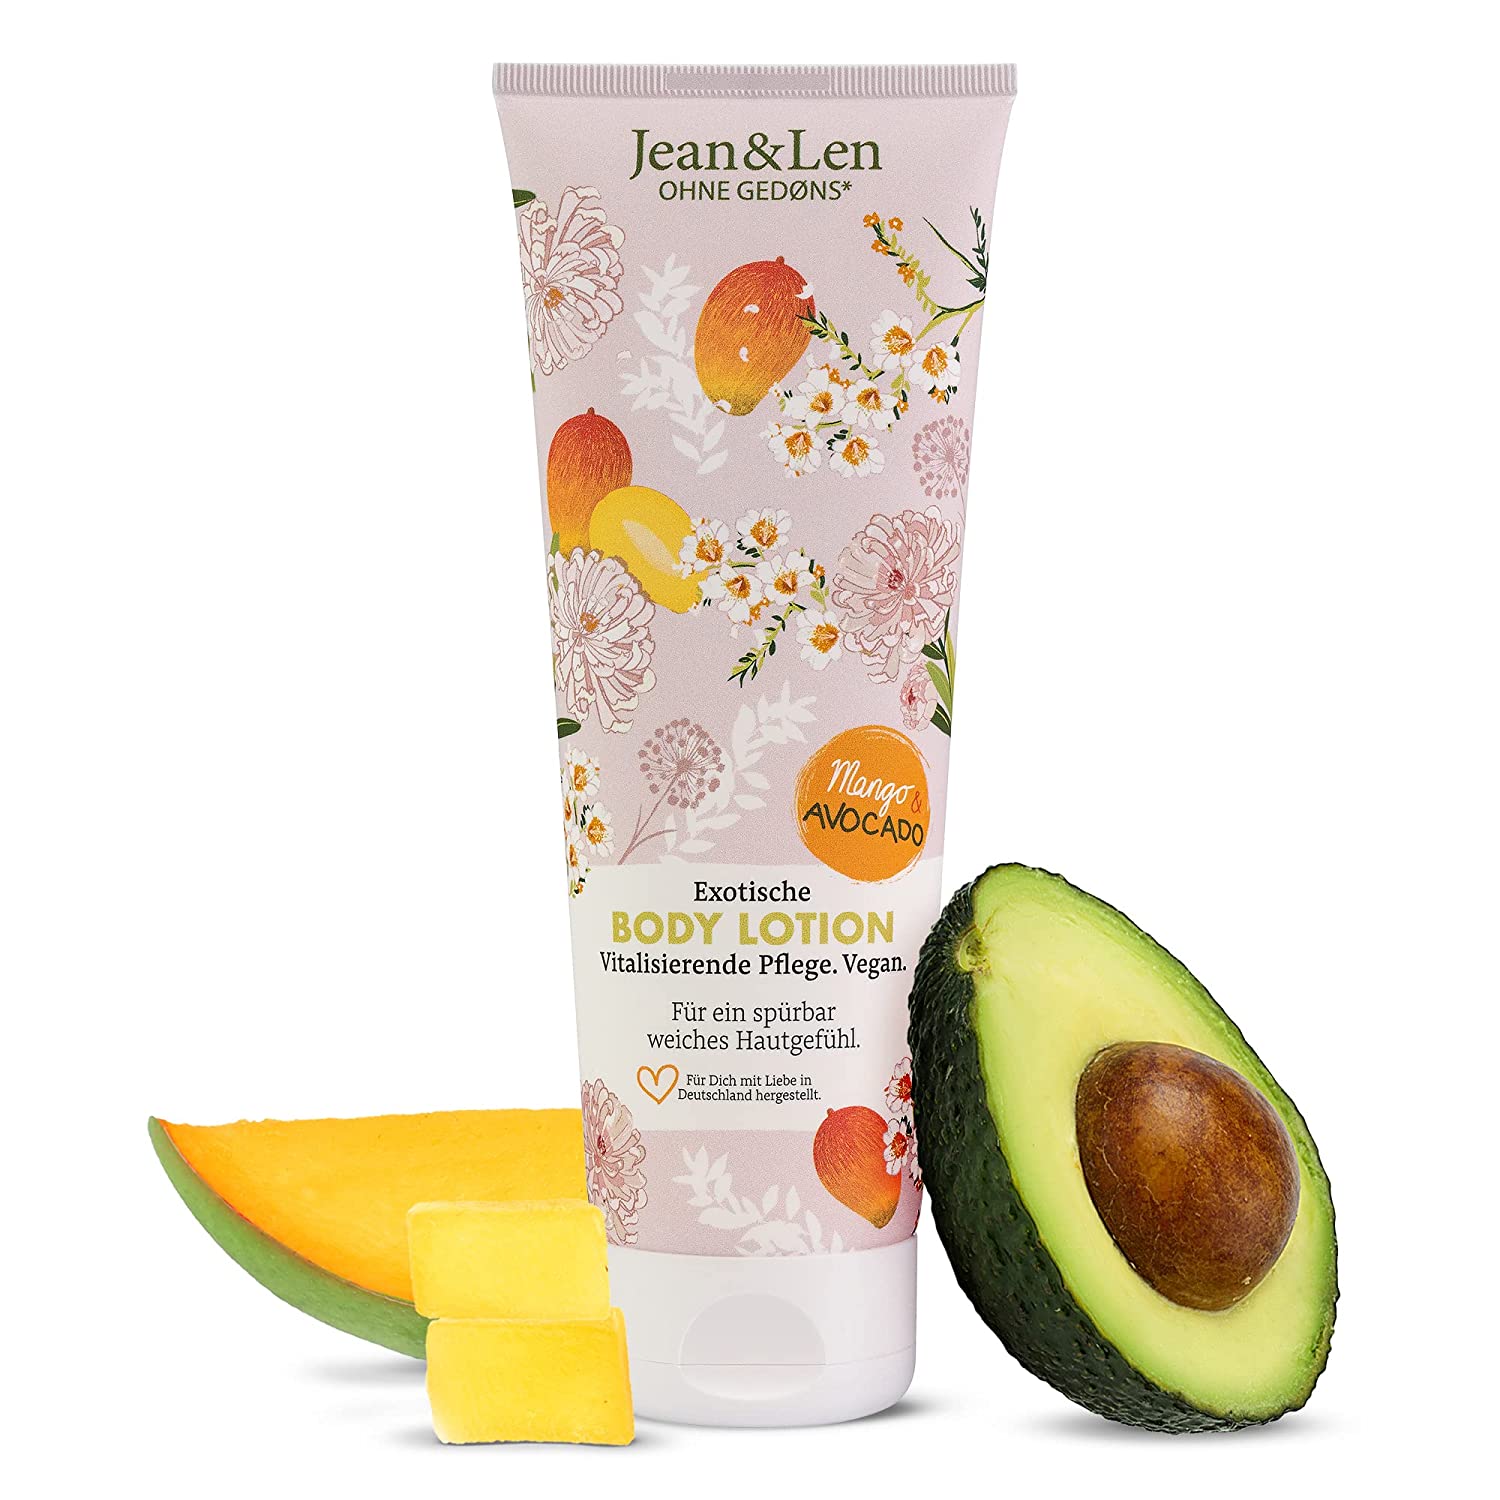 Jean & Len Exotic Body Lotion Mango & Avocado for All Skin Types, Light Formulation, Absorbs Quickly, PH Skin Ideal, Paraben & Silicone, Vegan Body Lotion, 250 ml